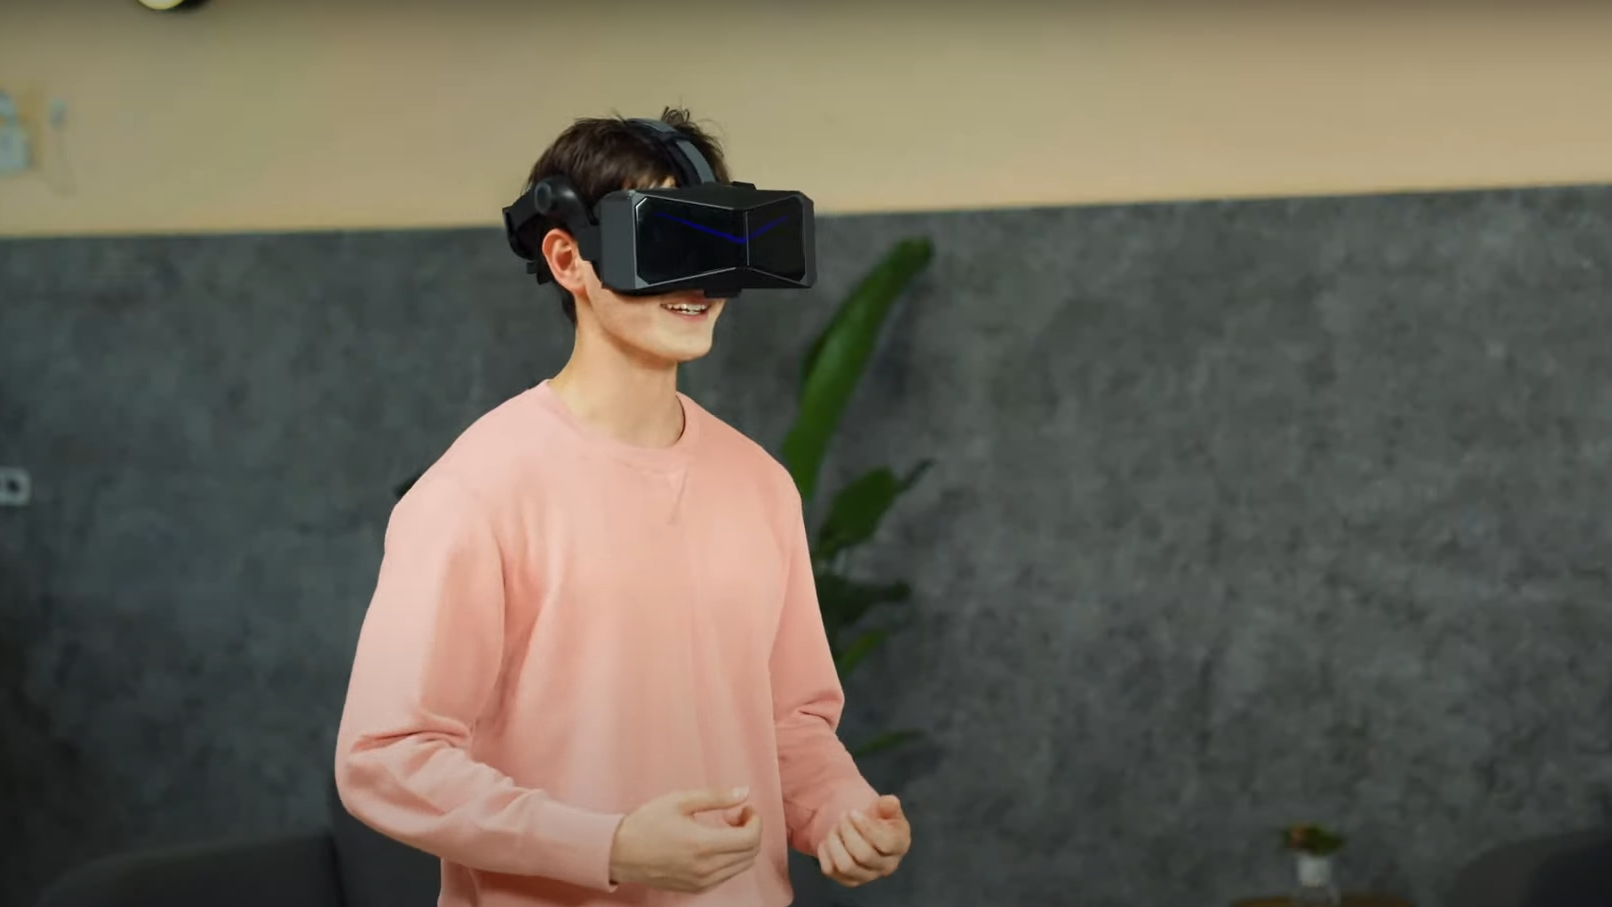 Pimax's Next-Generation Reality 12K QLED VR Headset Defies Belief